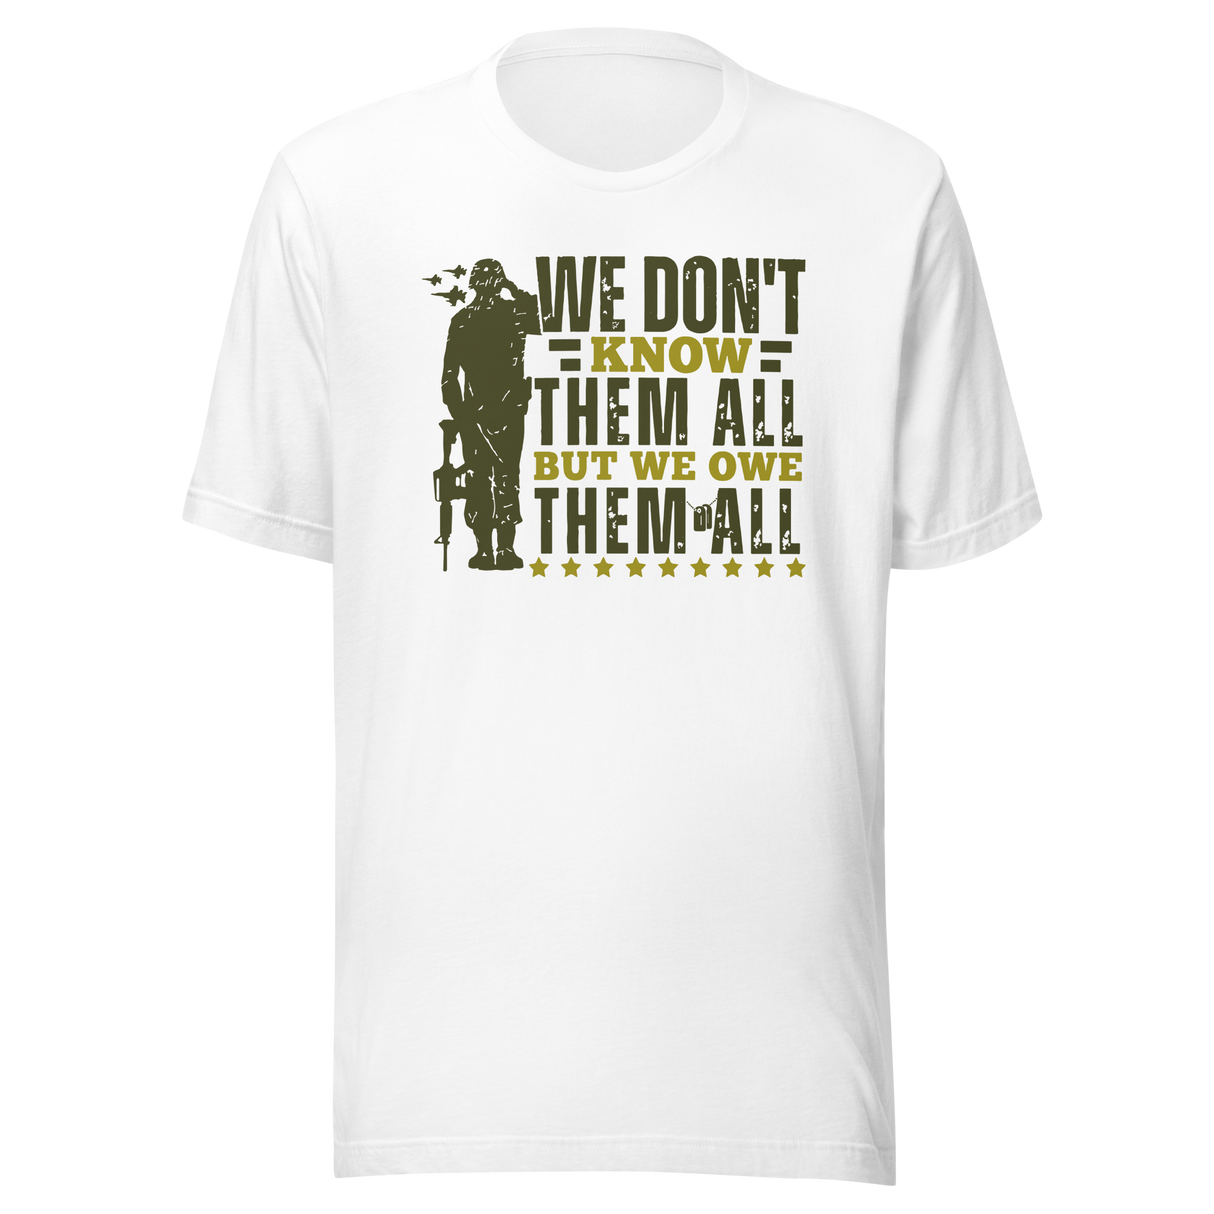 we-dont-know-them-all-but-owe-them-all-government-tee-veteran-t-shirt-government-tee-tribute-t-shirt-respect-tee#color_white